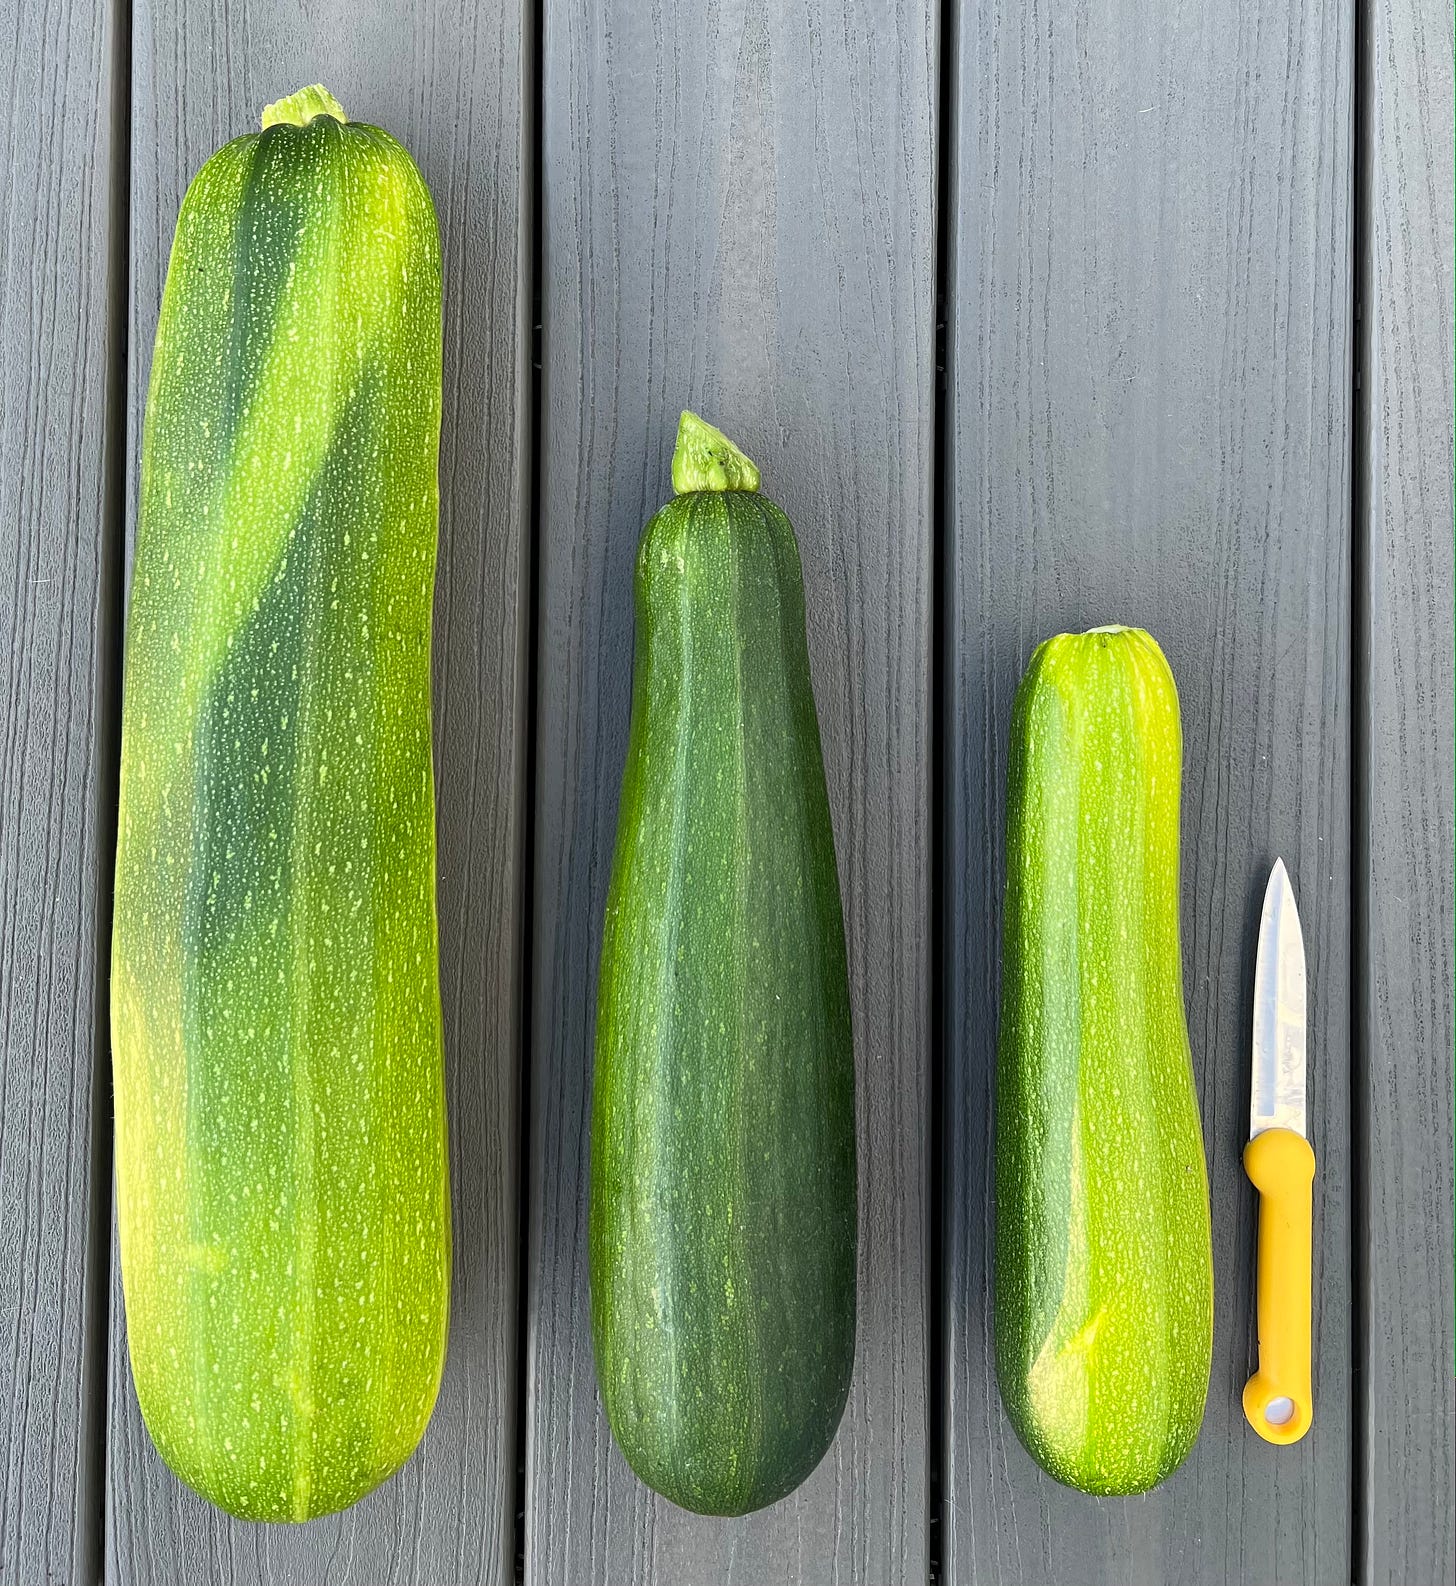 Photo of 3 zucchini on a grey deck with yellow knife next to them for scale.